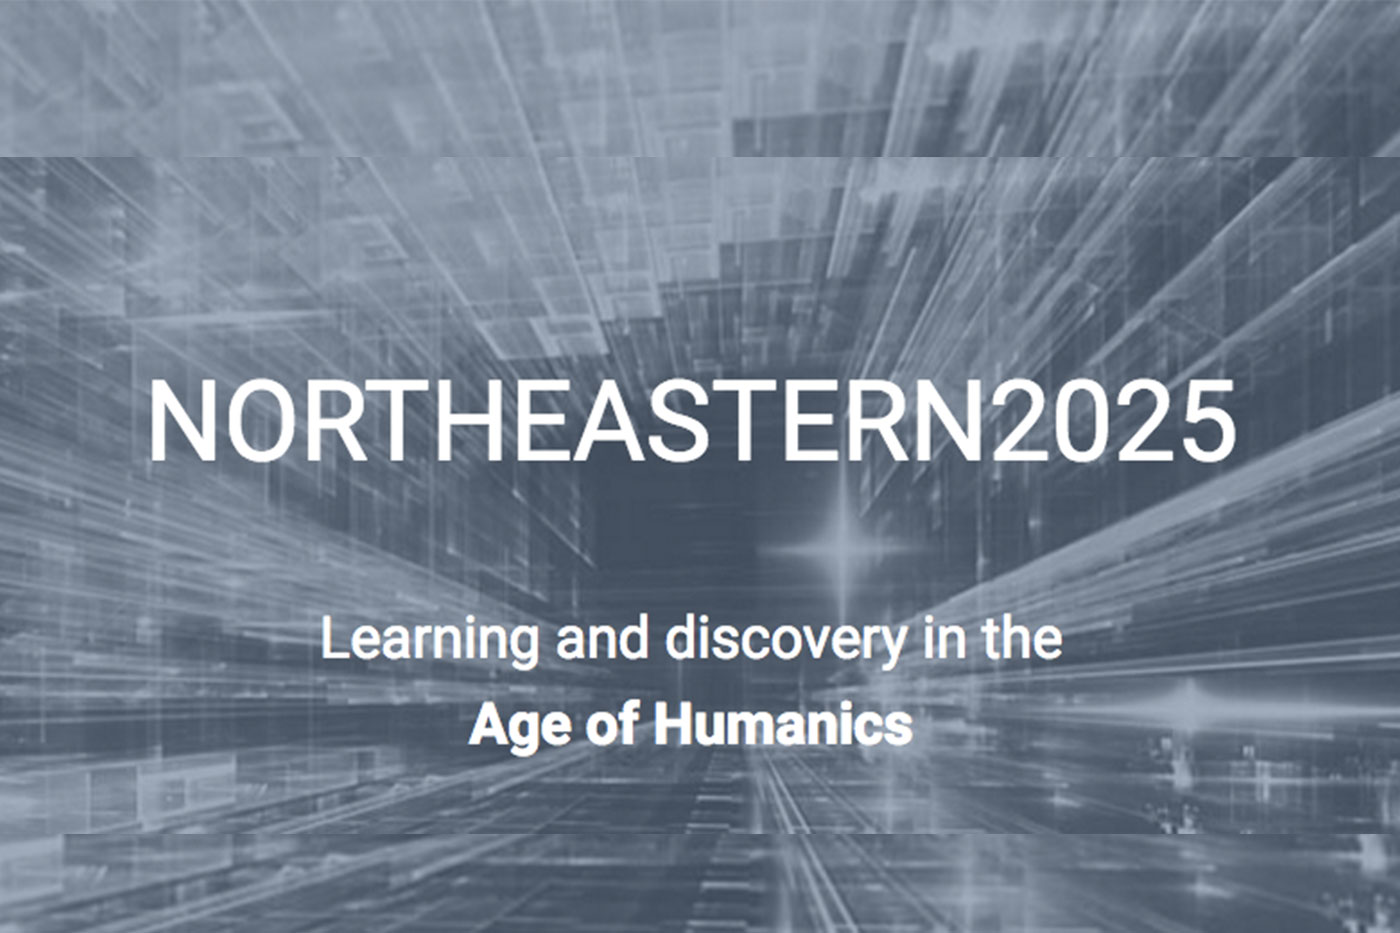 Board of Trustees approves new academic plan, Northeastern 2025